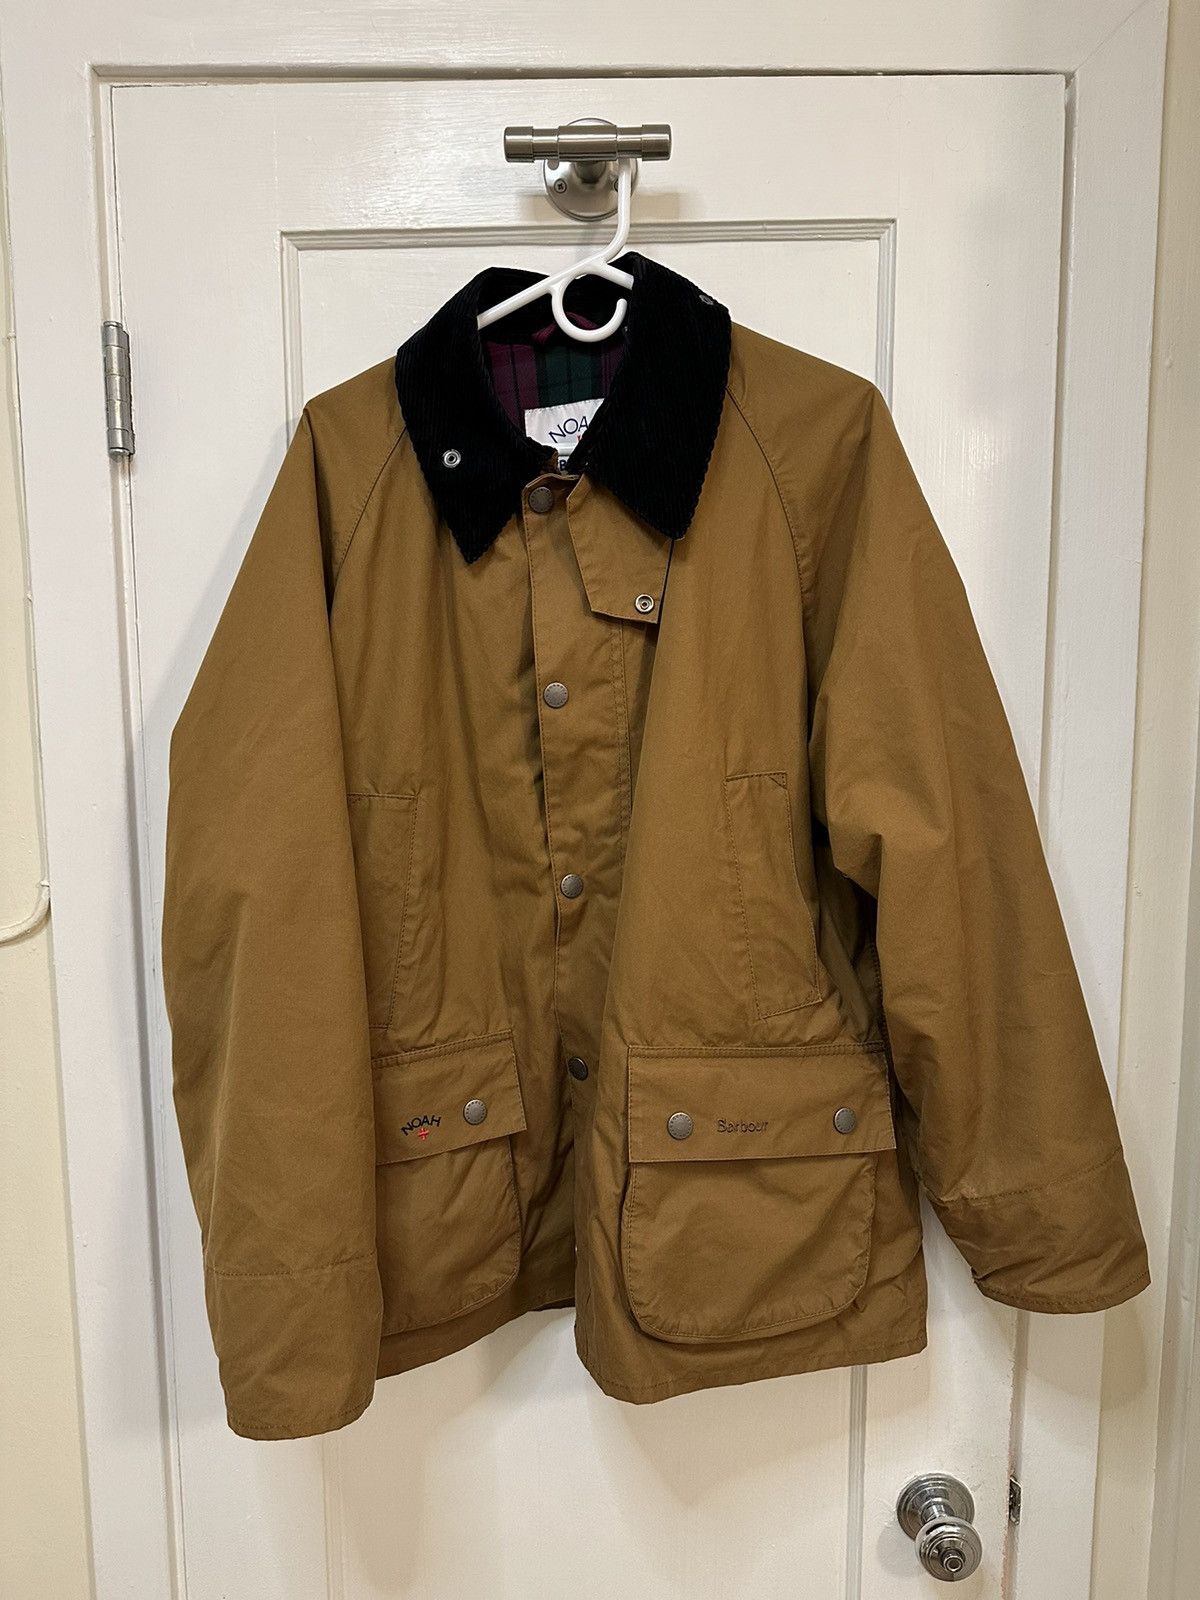 Barbour Noah - Barbour Dry Waxed Bedale Jacket | Grailed